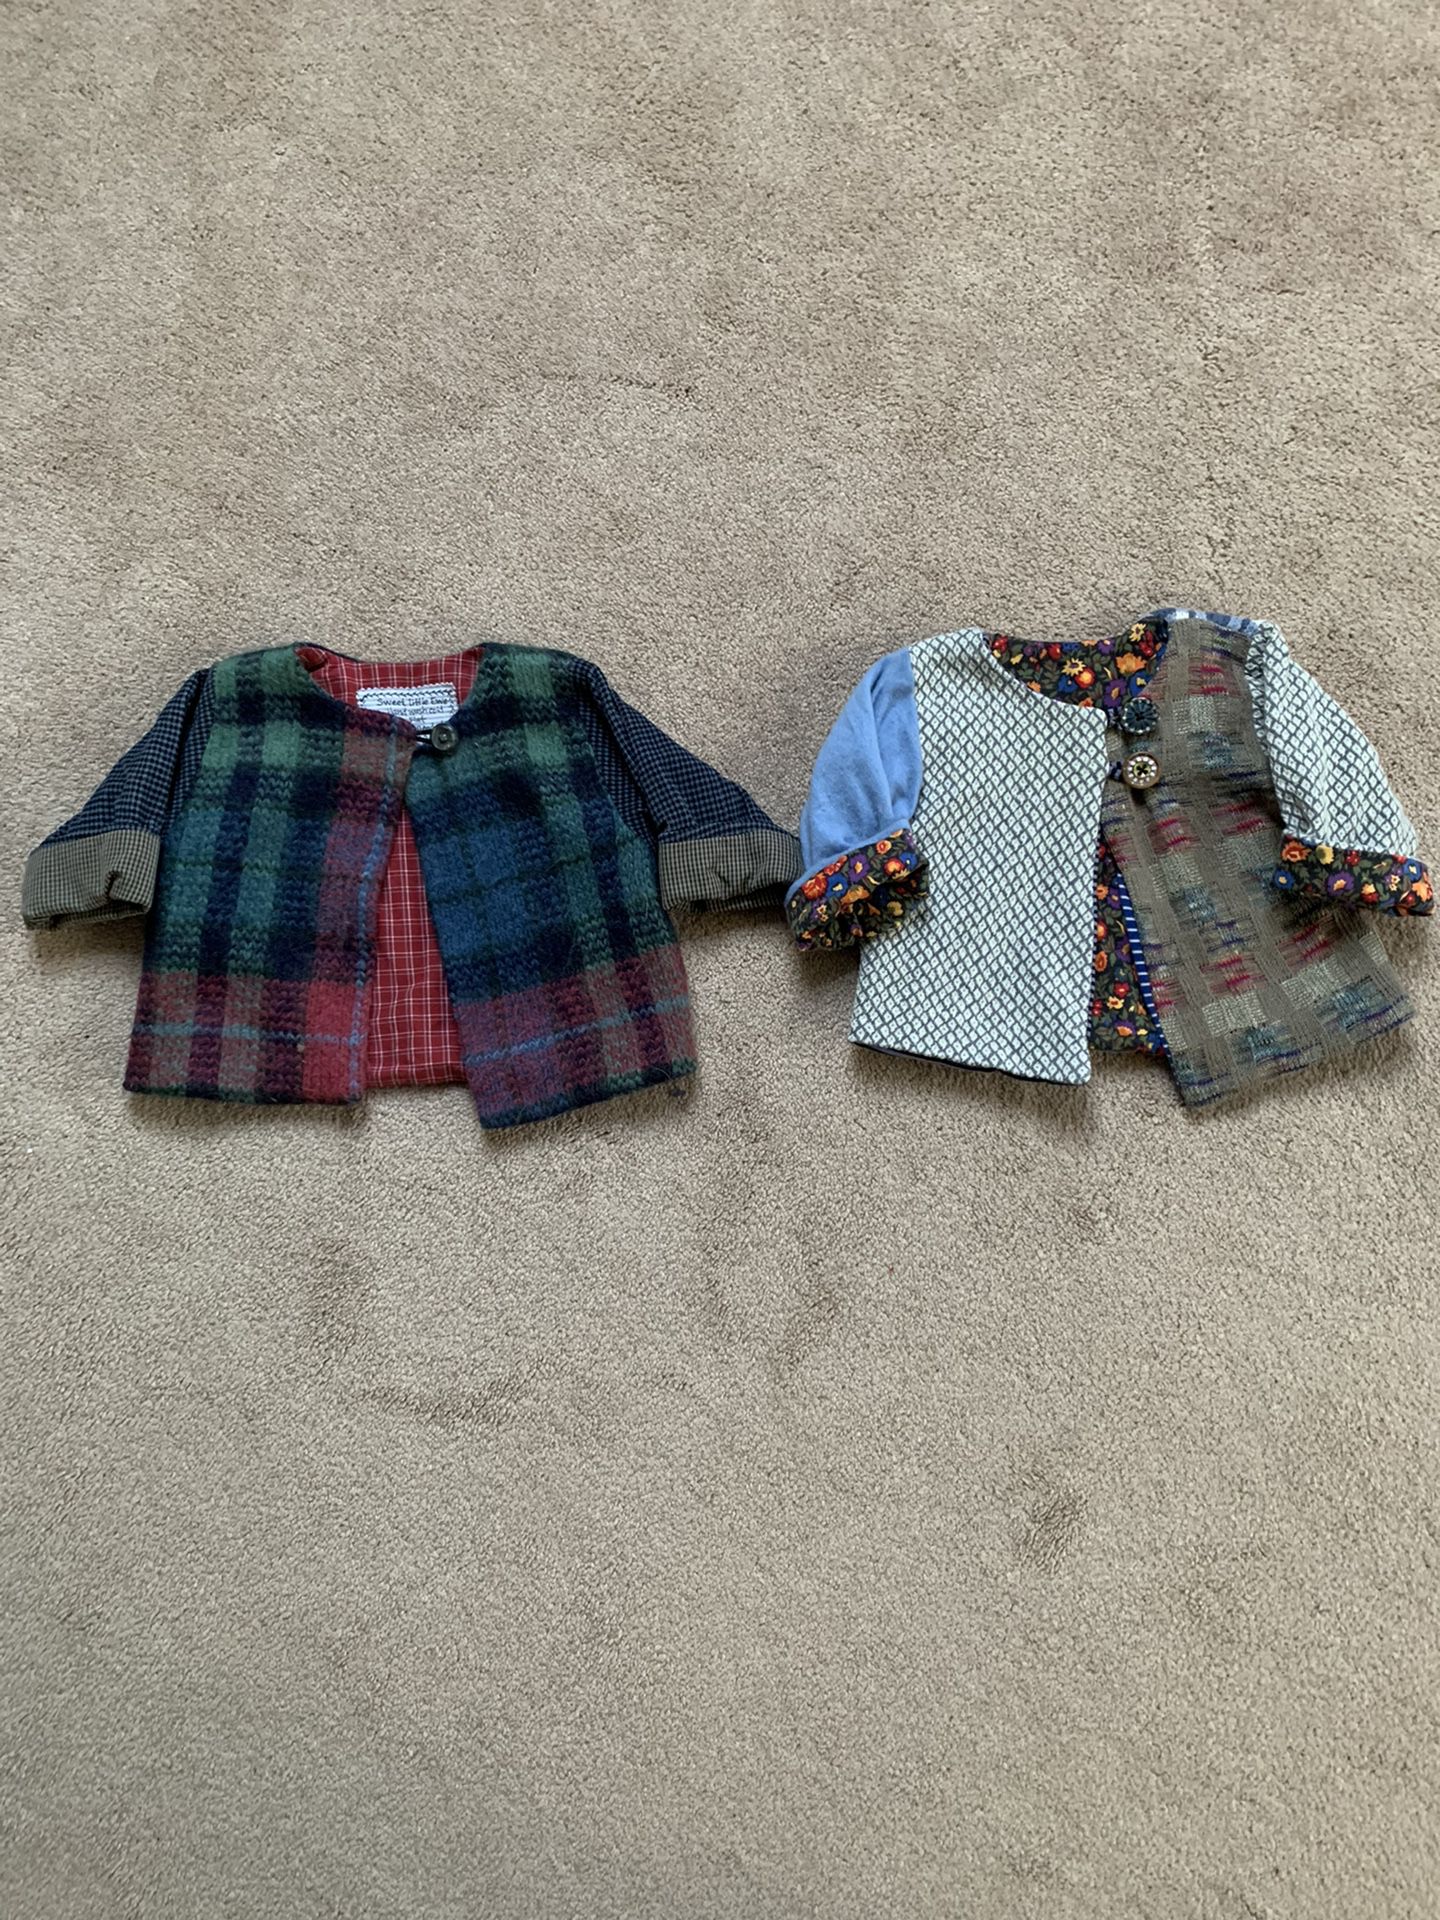 Lot of 2 Absolutely Beautiful Like New Handmade Kids Cardigans, Size 2T-3T! Awesomely Unique.